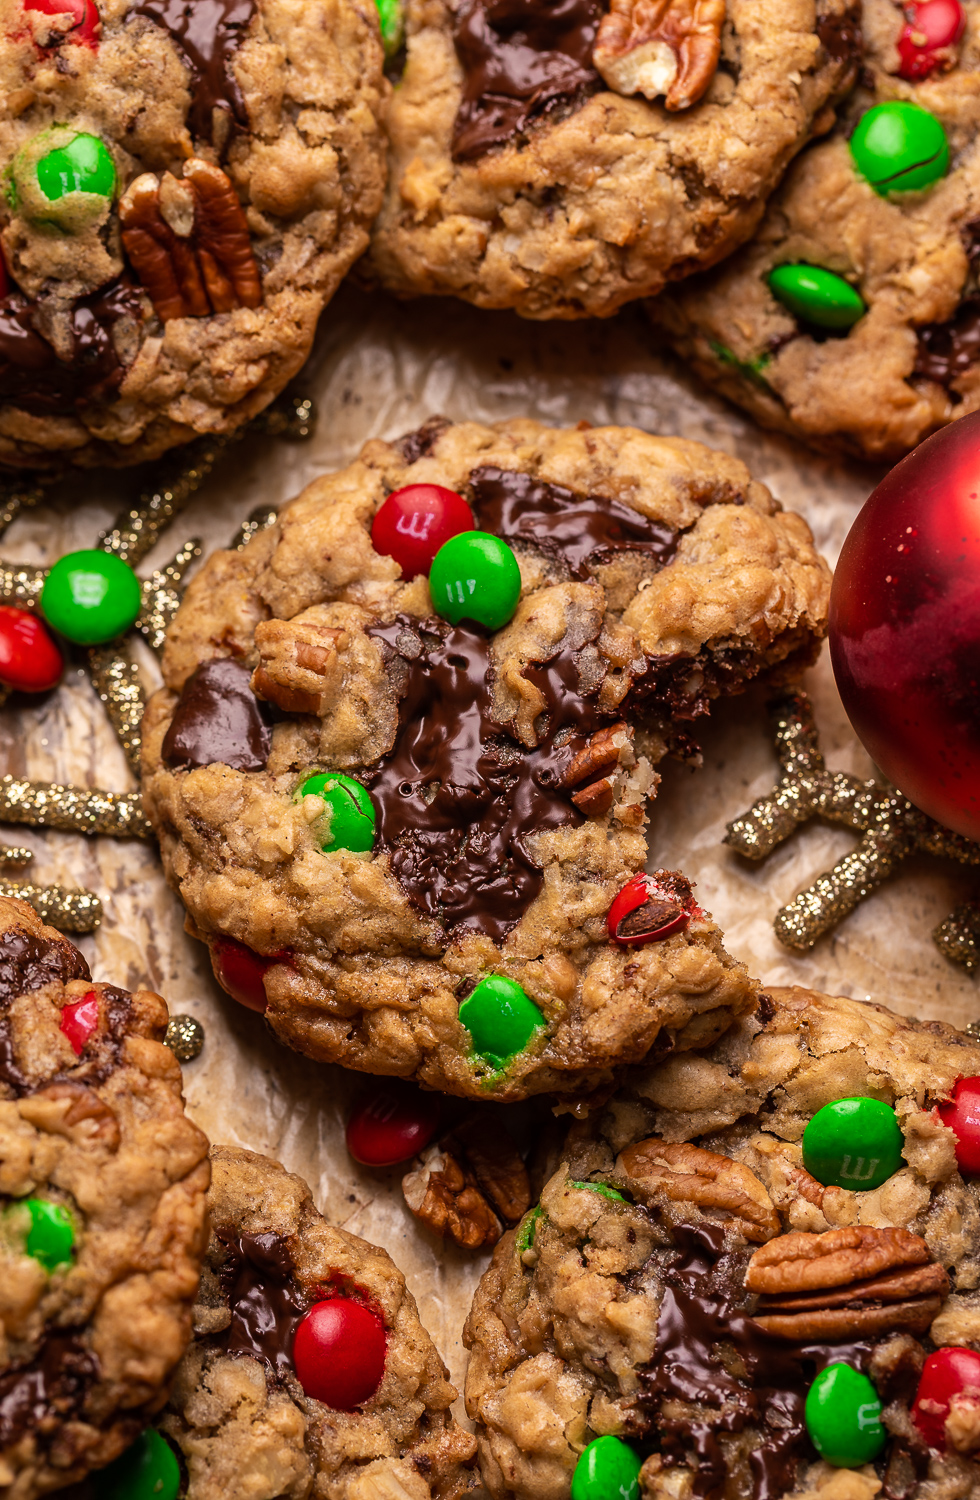 These Special Edition Christmas Cowboy Cookies are loaded with chocolate, pecans, shredded coconut, toffee, and holiday M&Ms!